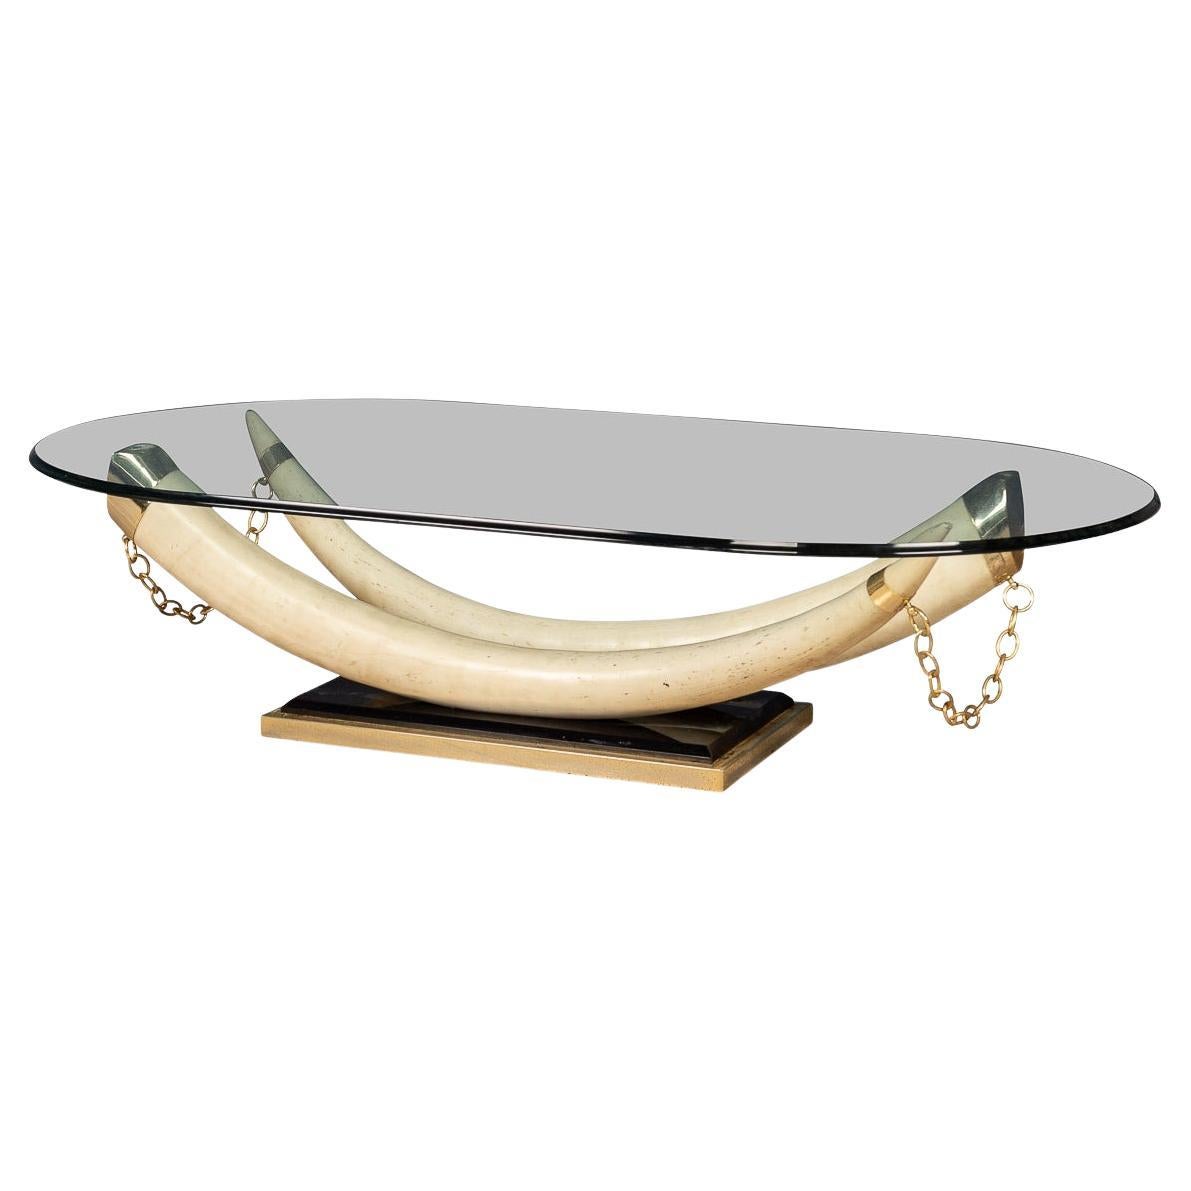 20th Century French Faux Tusk Coffee Table, c.1970